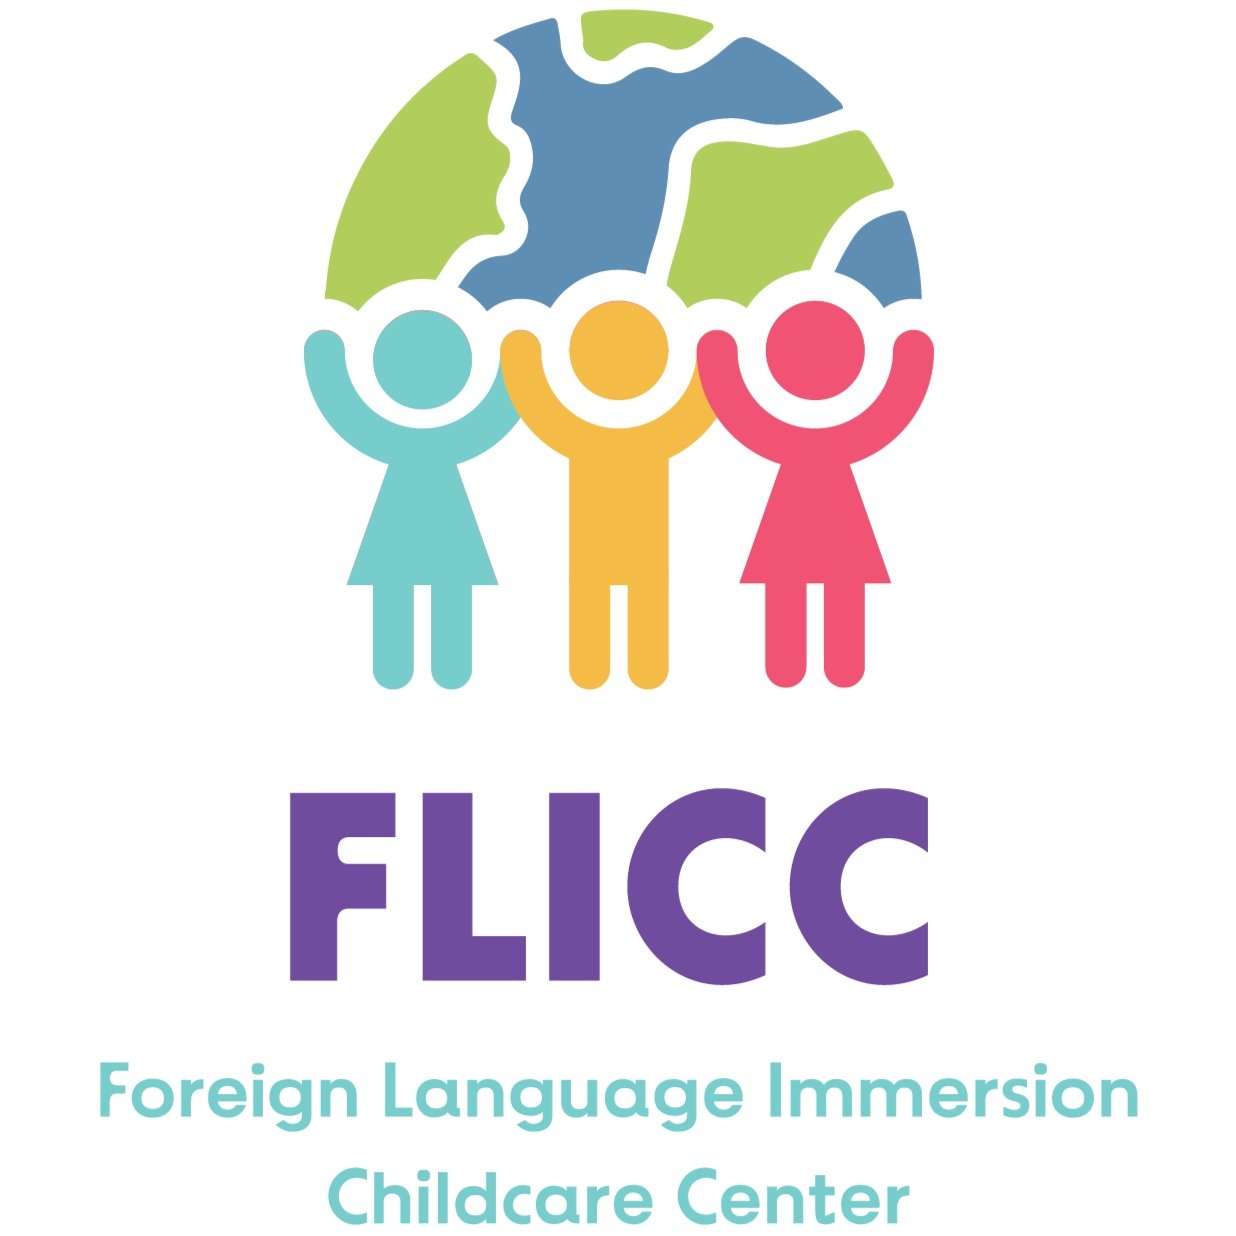 Foreign Language Immersion Childcare Center